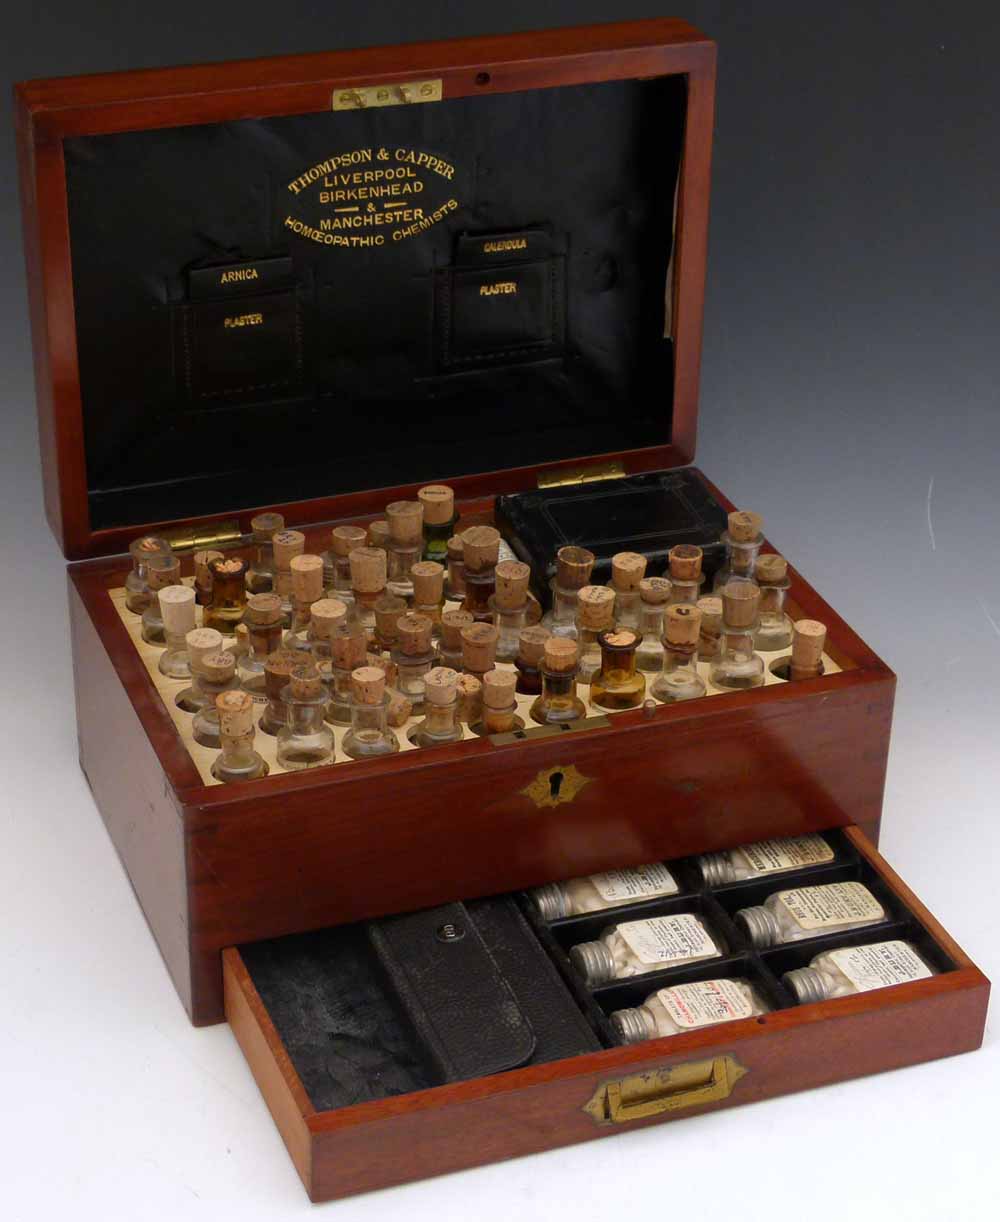 Late Victorian mahogany homeopathic medicine chest by Thompson & Capper, Homeopathic Chemists, the